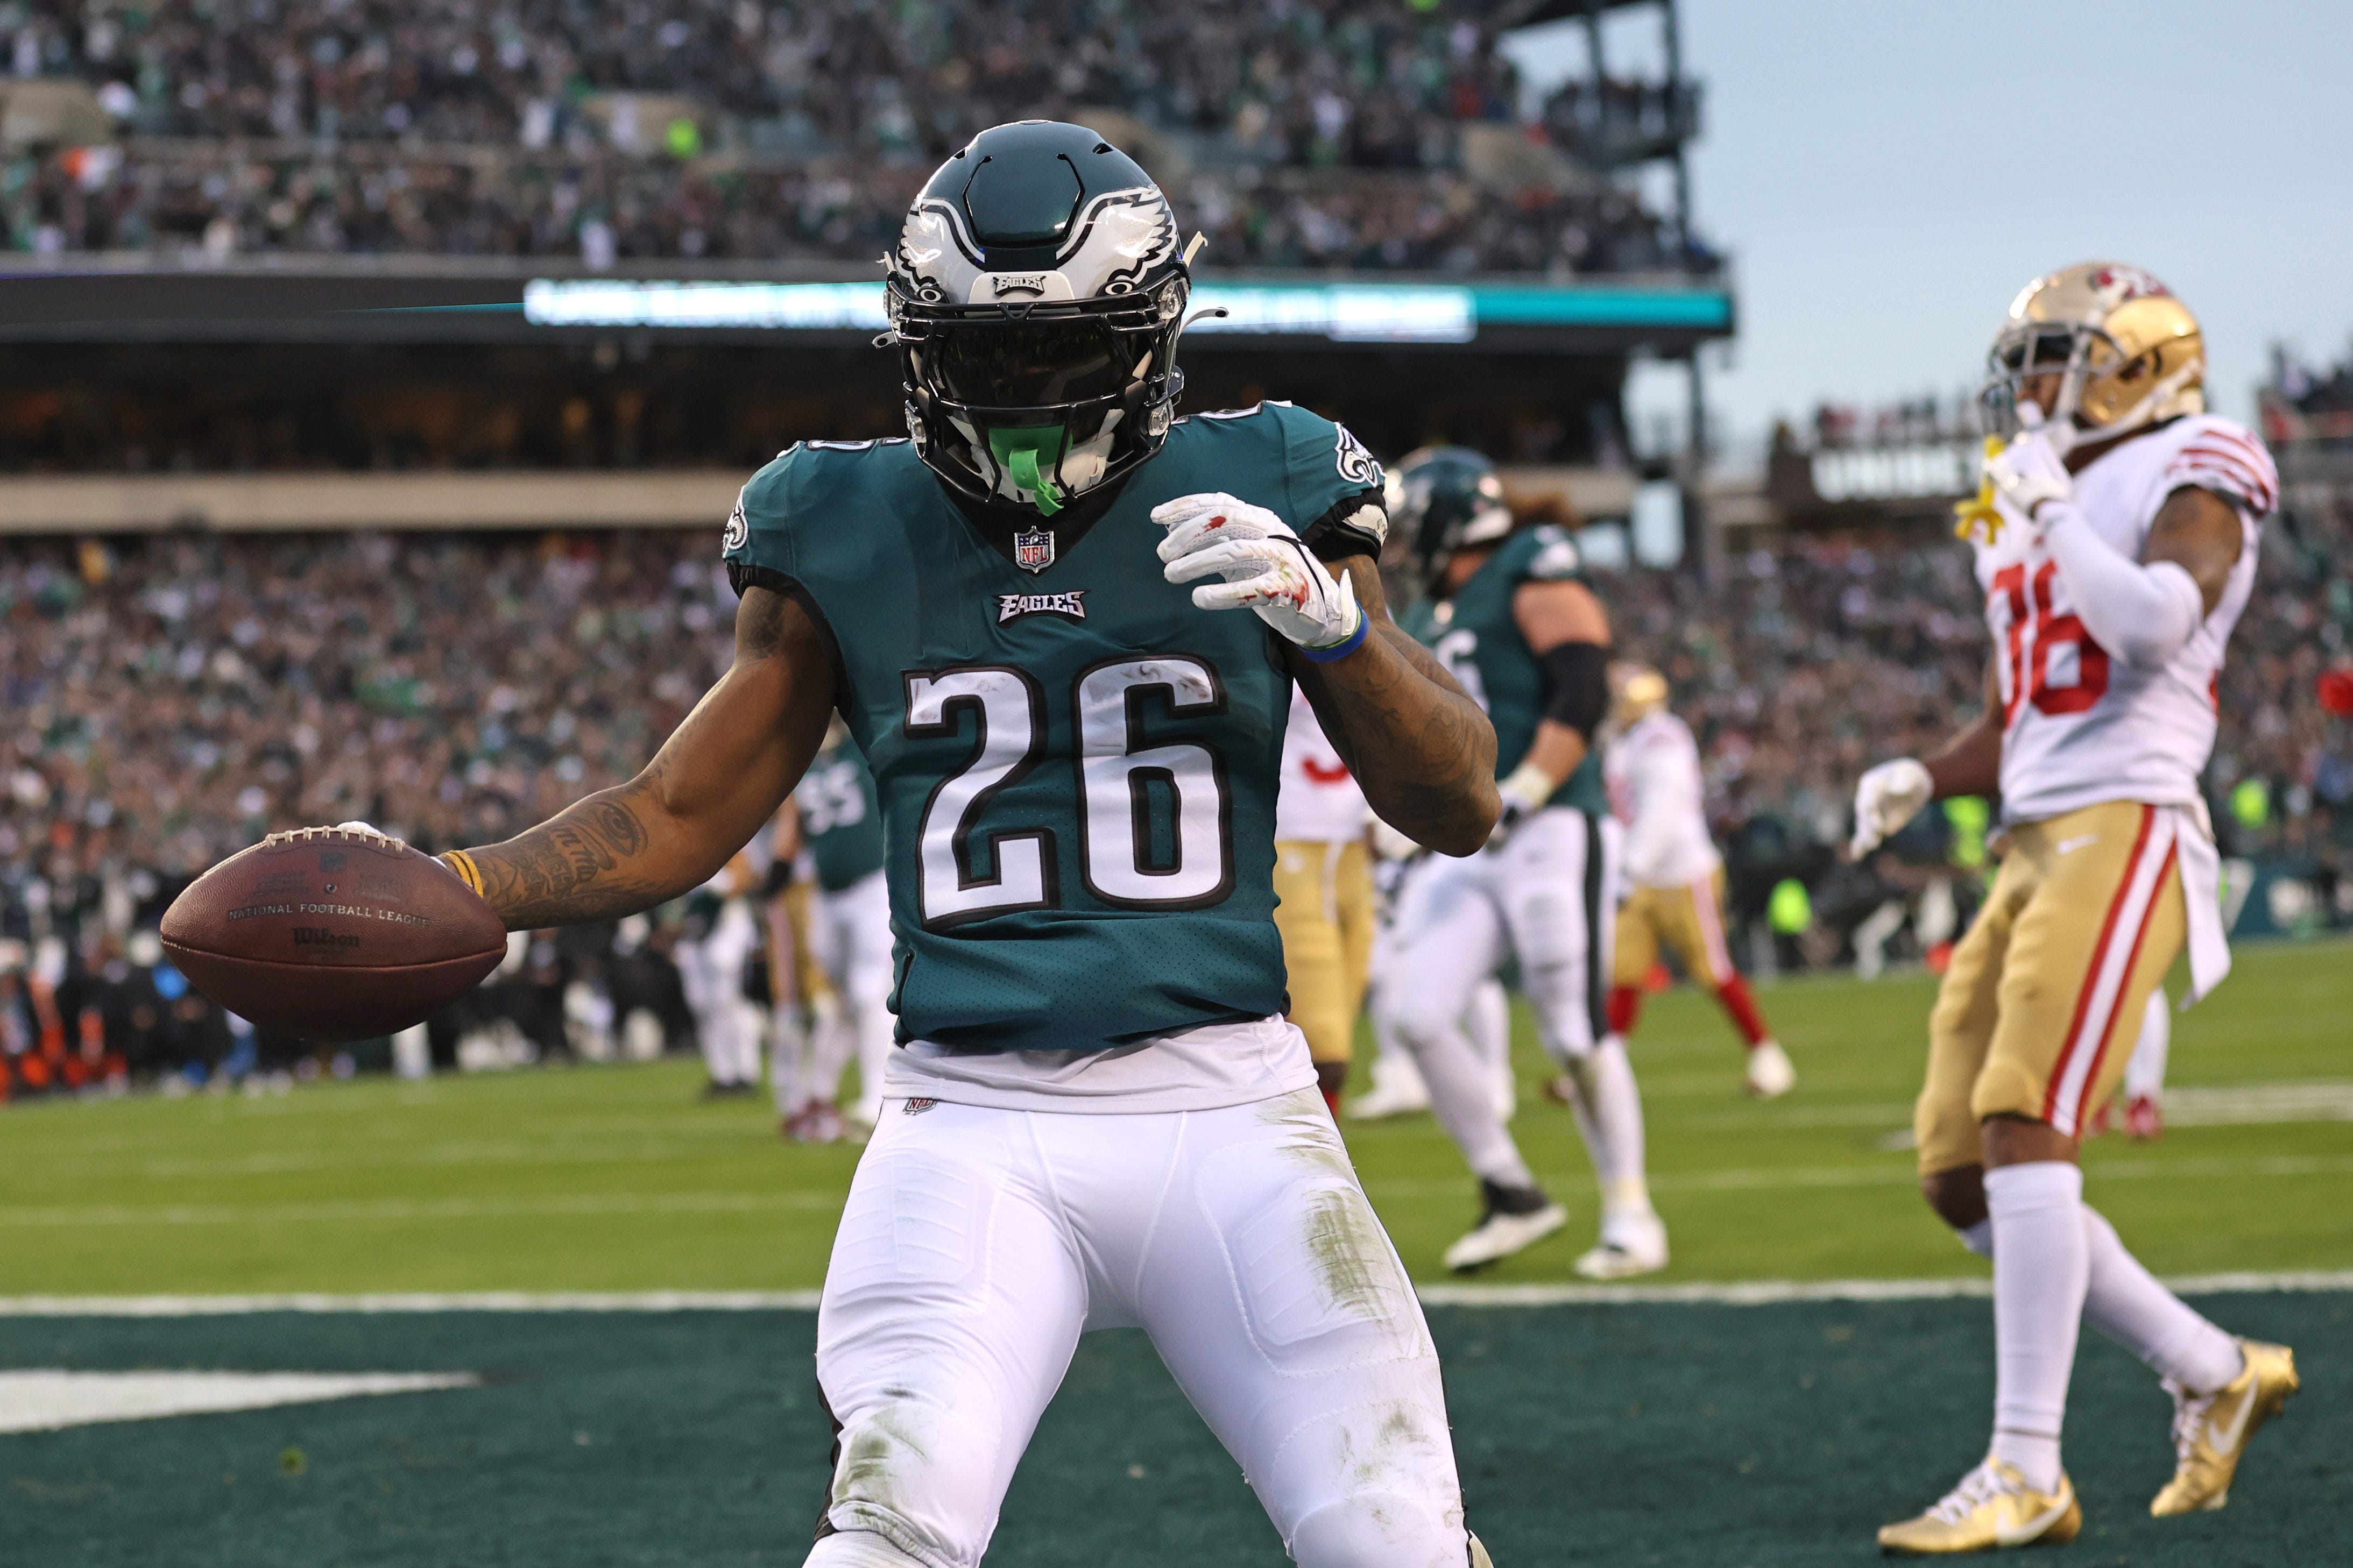 49ers vs. Eagles score, analysis: Philadelphia rushes for two quick TDs to pad lead at halftime